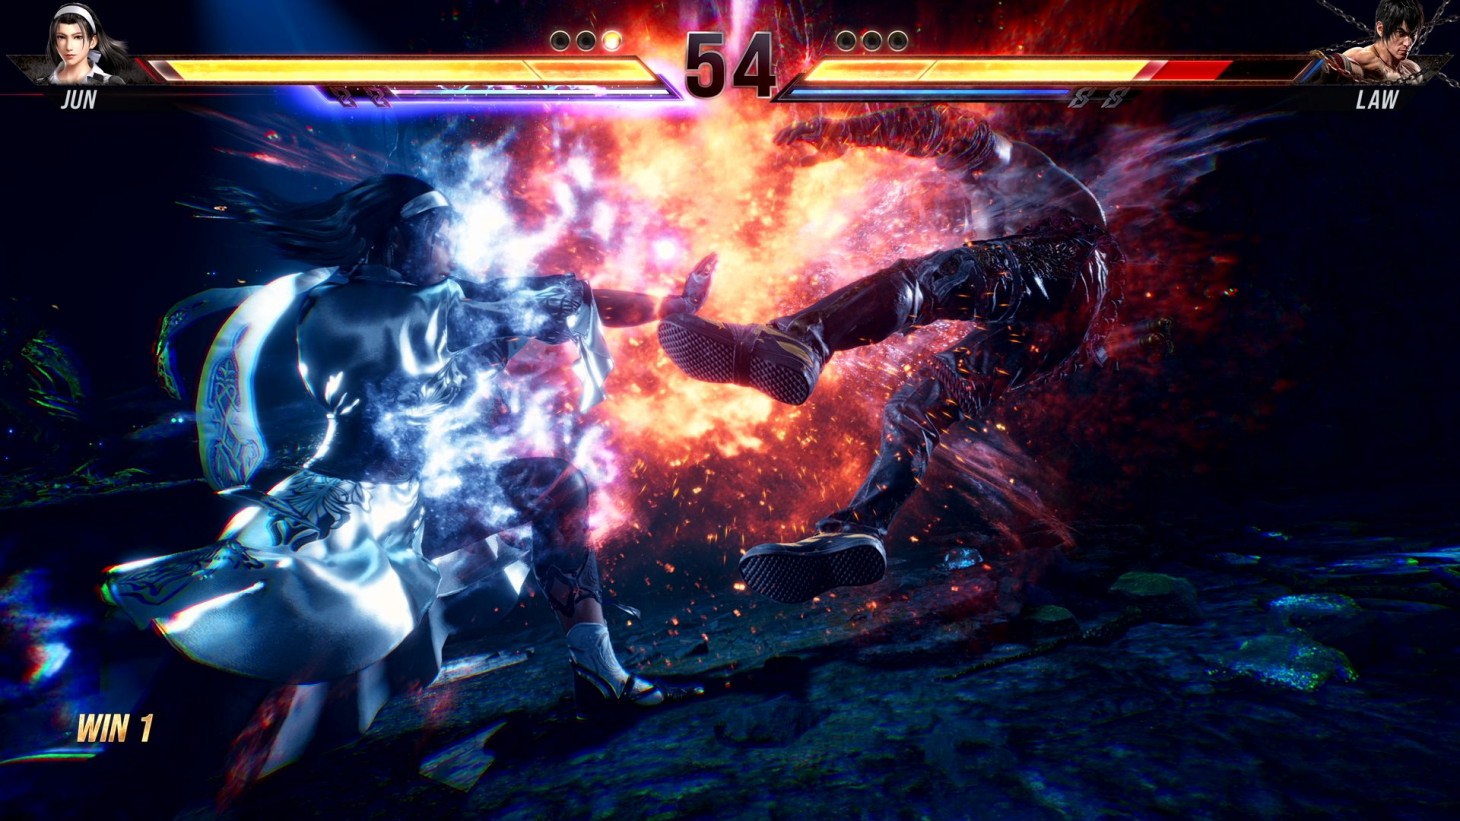 You can play Tekken 8 next month if you register now for the